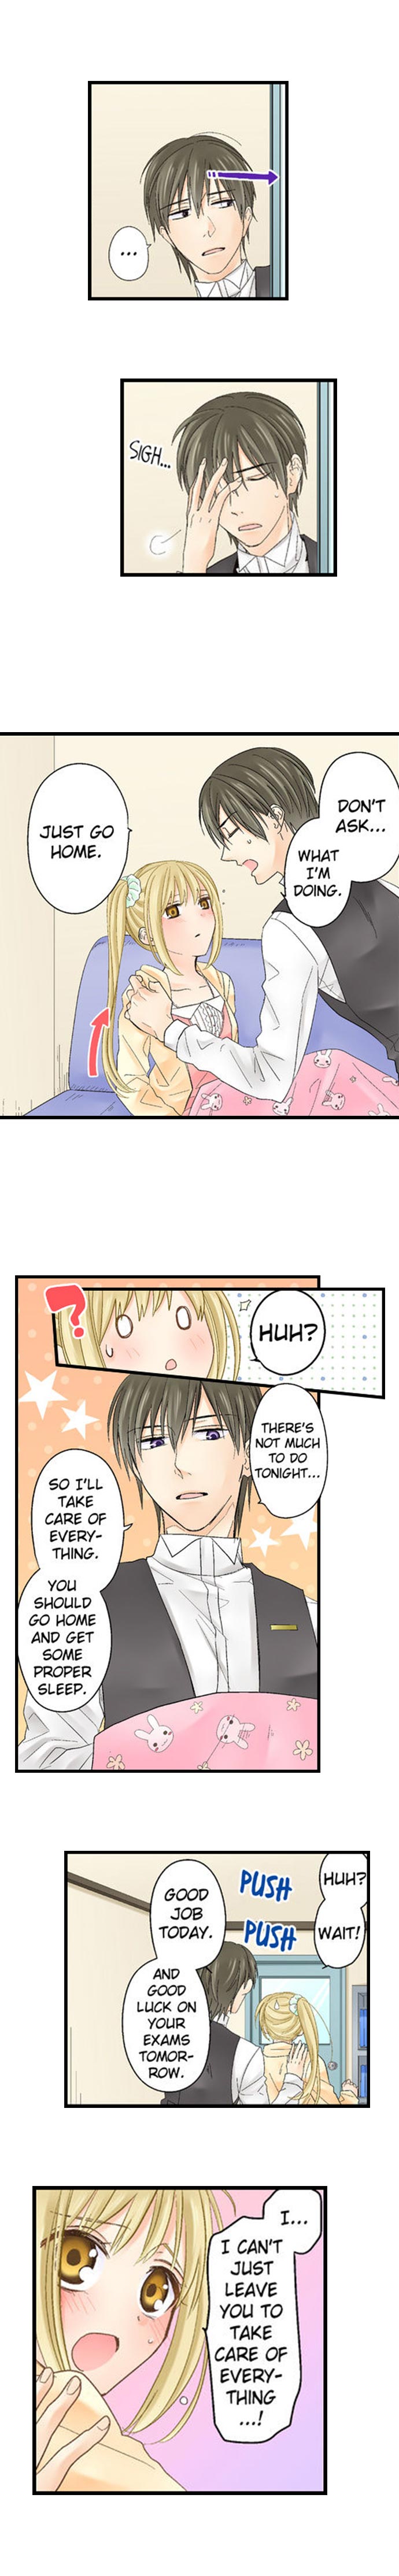 Running a Love Hotel with My Math Teacher - Chapter 14 Page 8